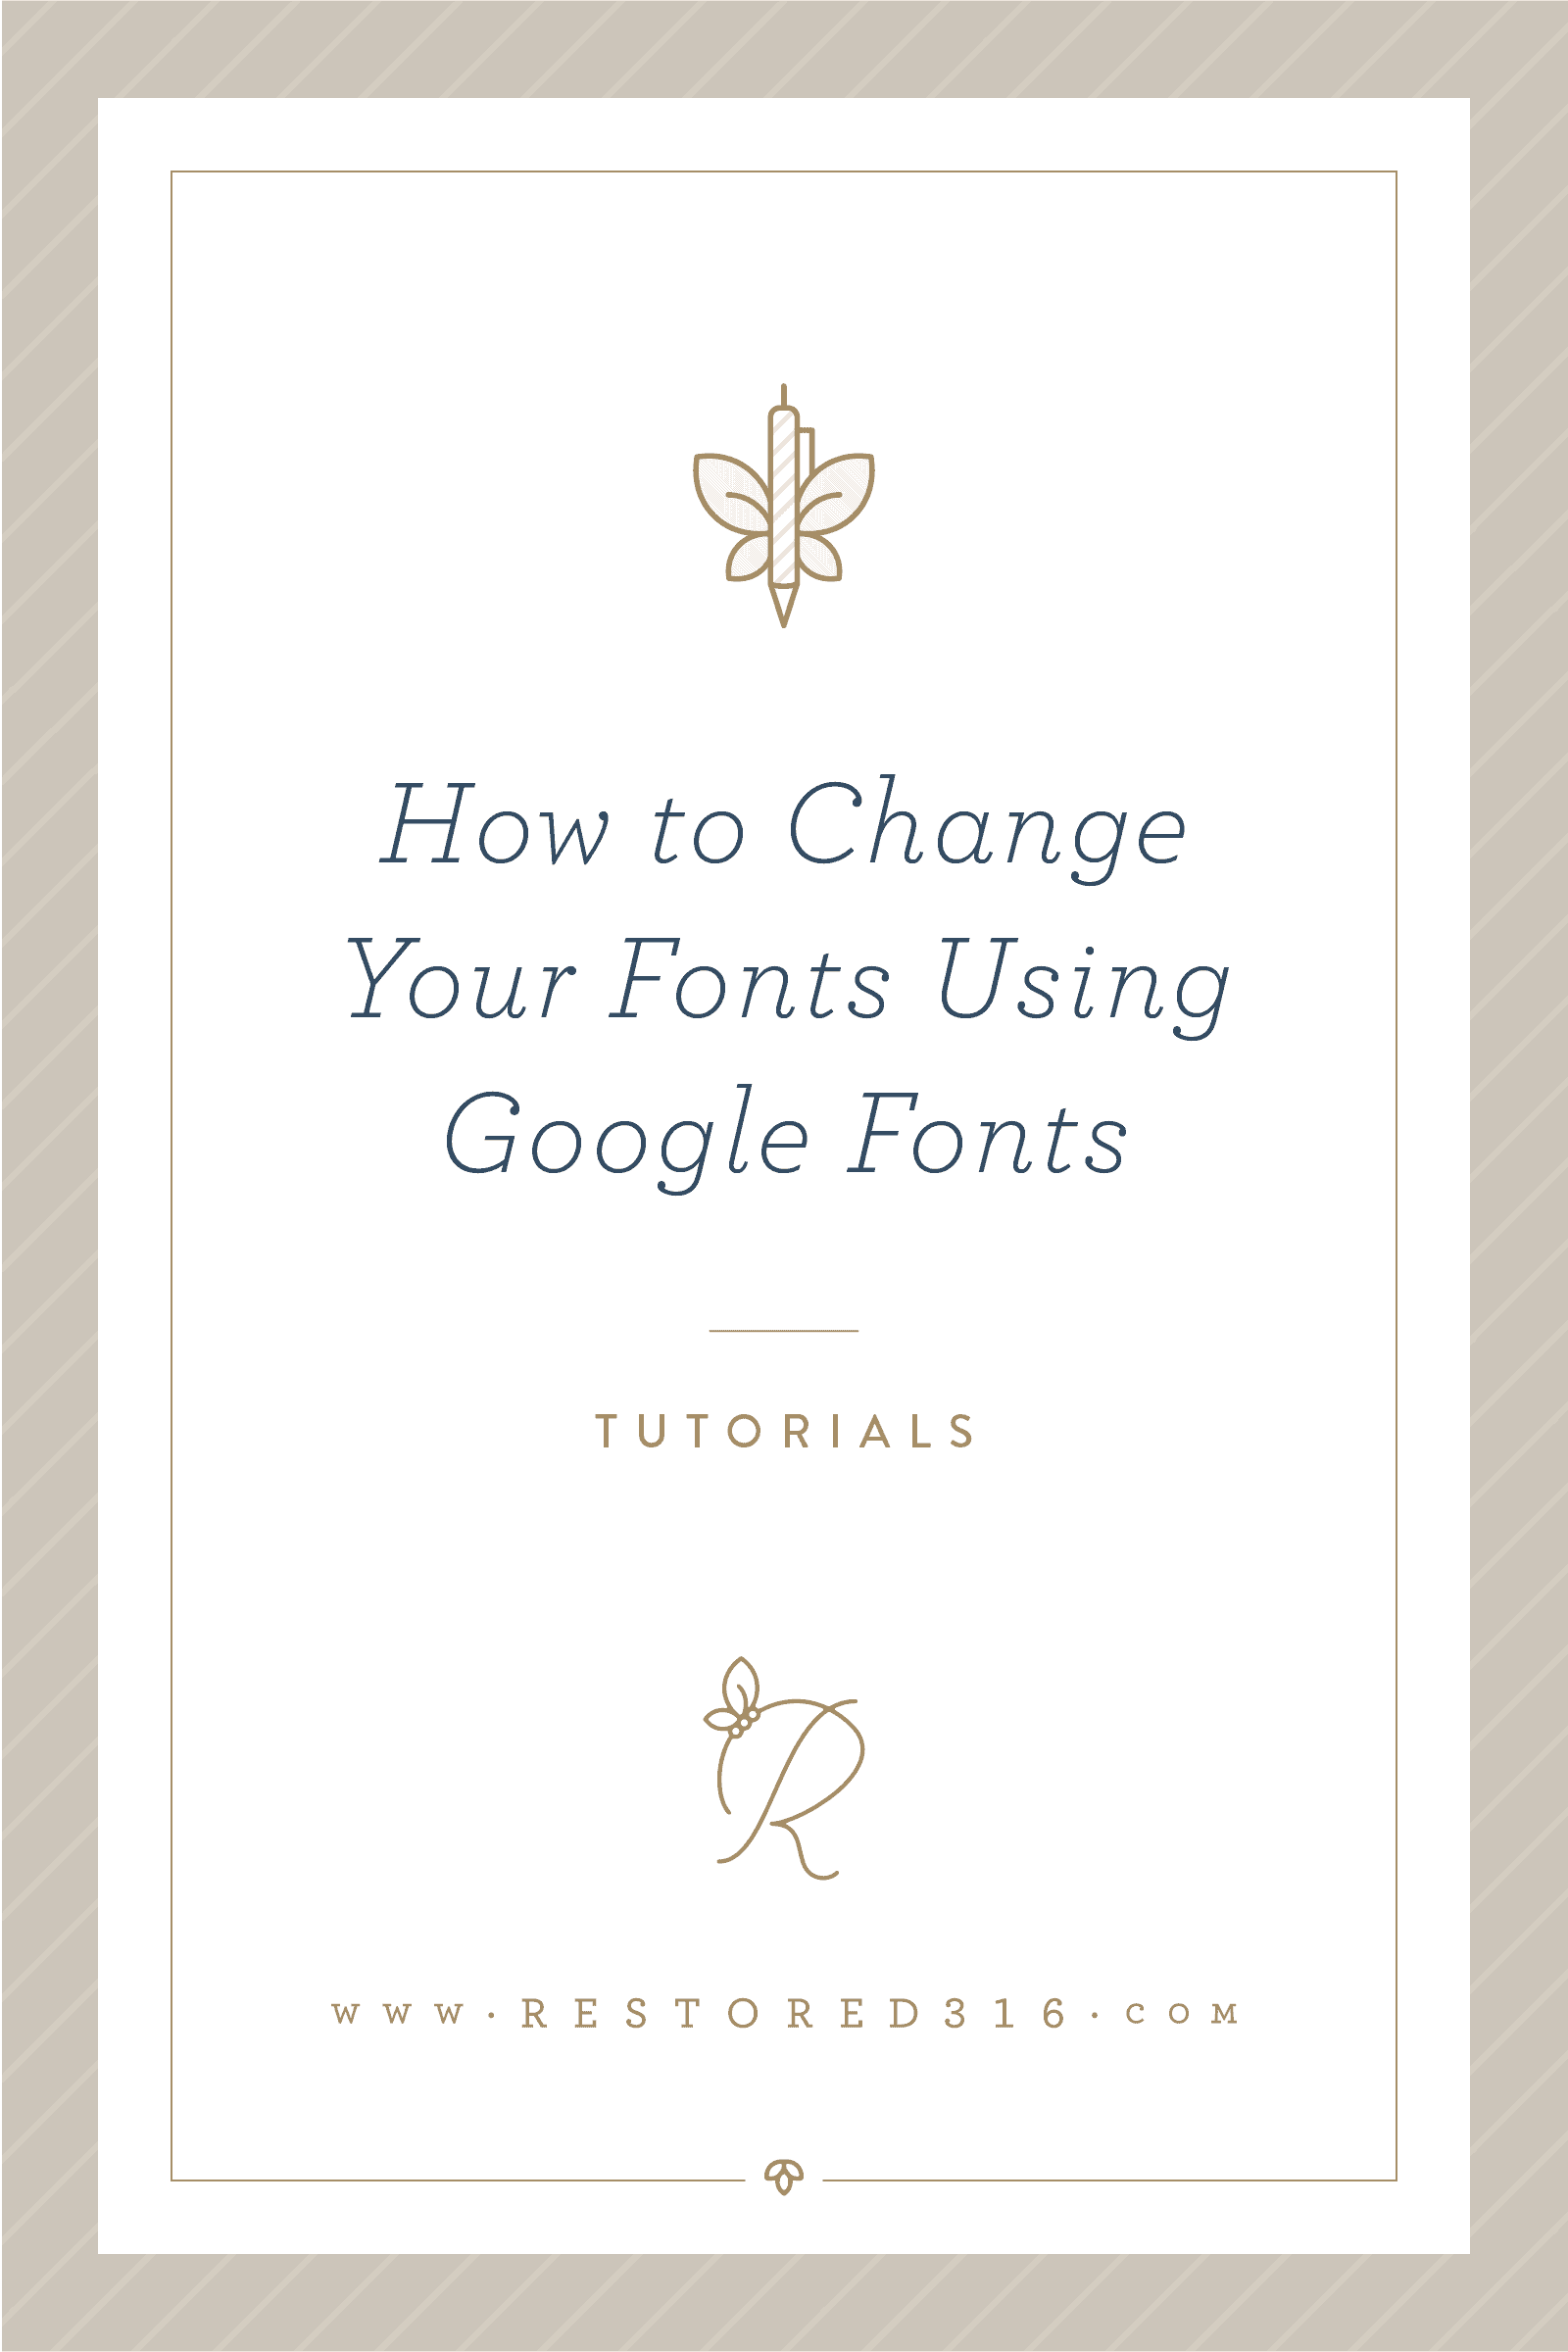 How to Change Your Fonts Using Google Fonts